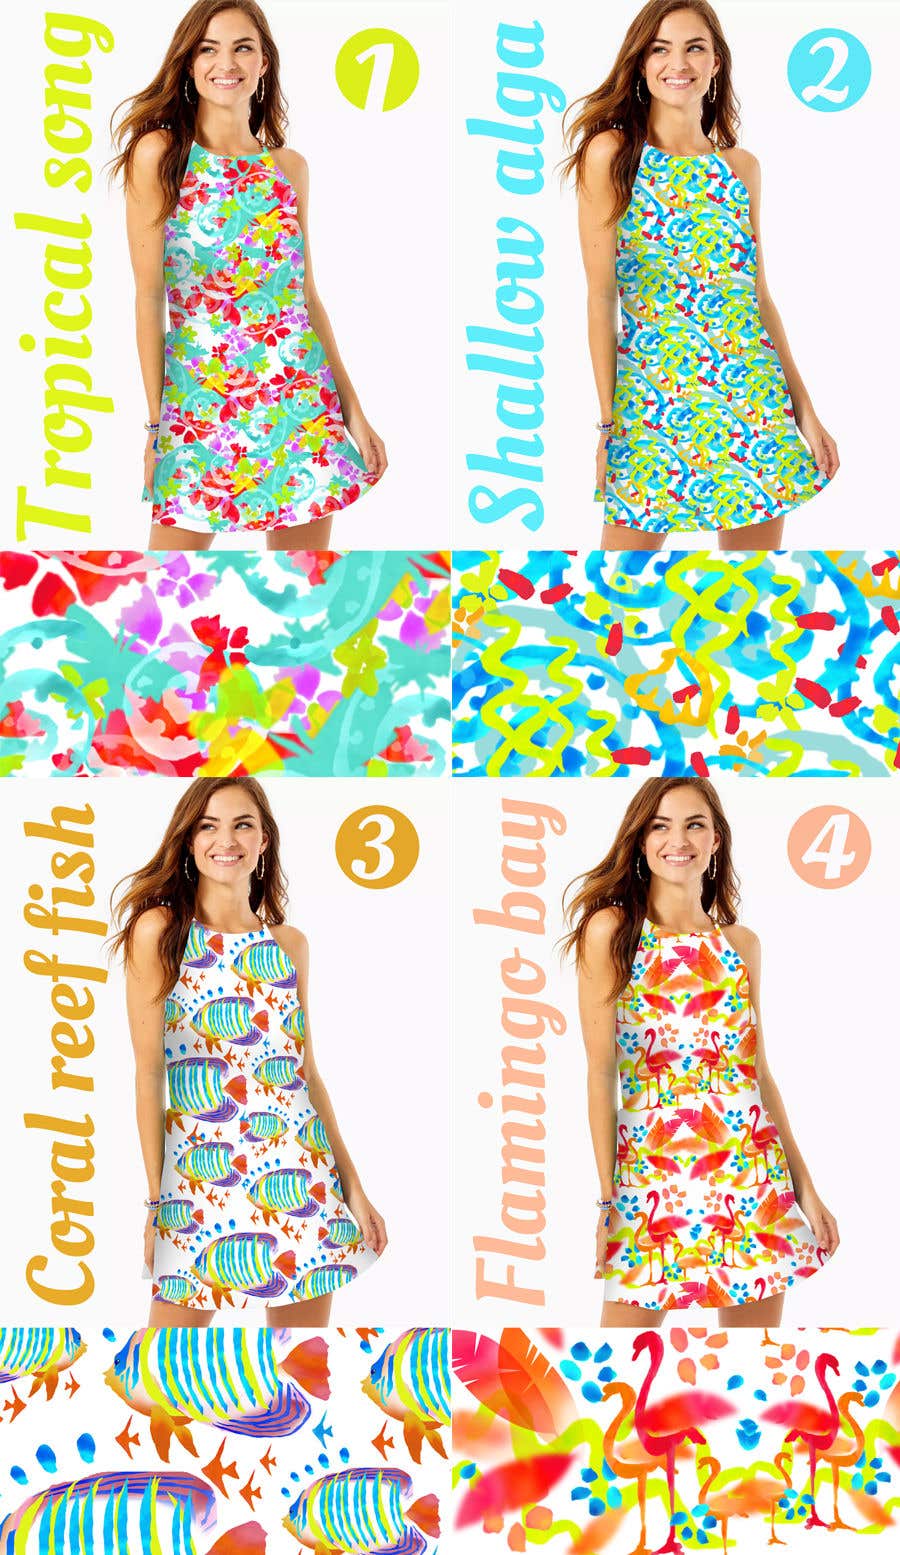 Penyertaan Peraduan #172 untuk                                                 Design 3-5 tropically inspired patterns for our clothing and accessory line
                                            